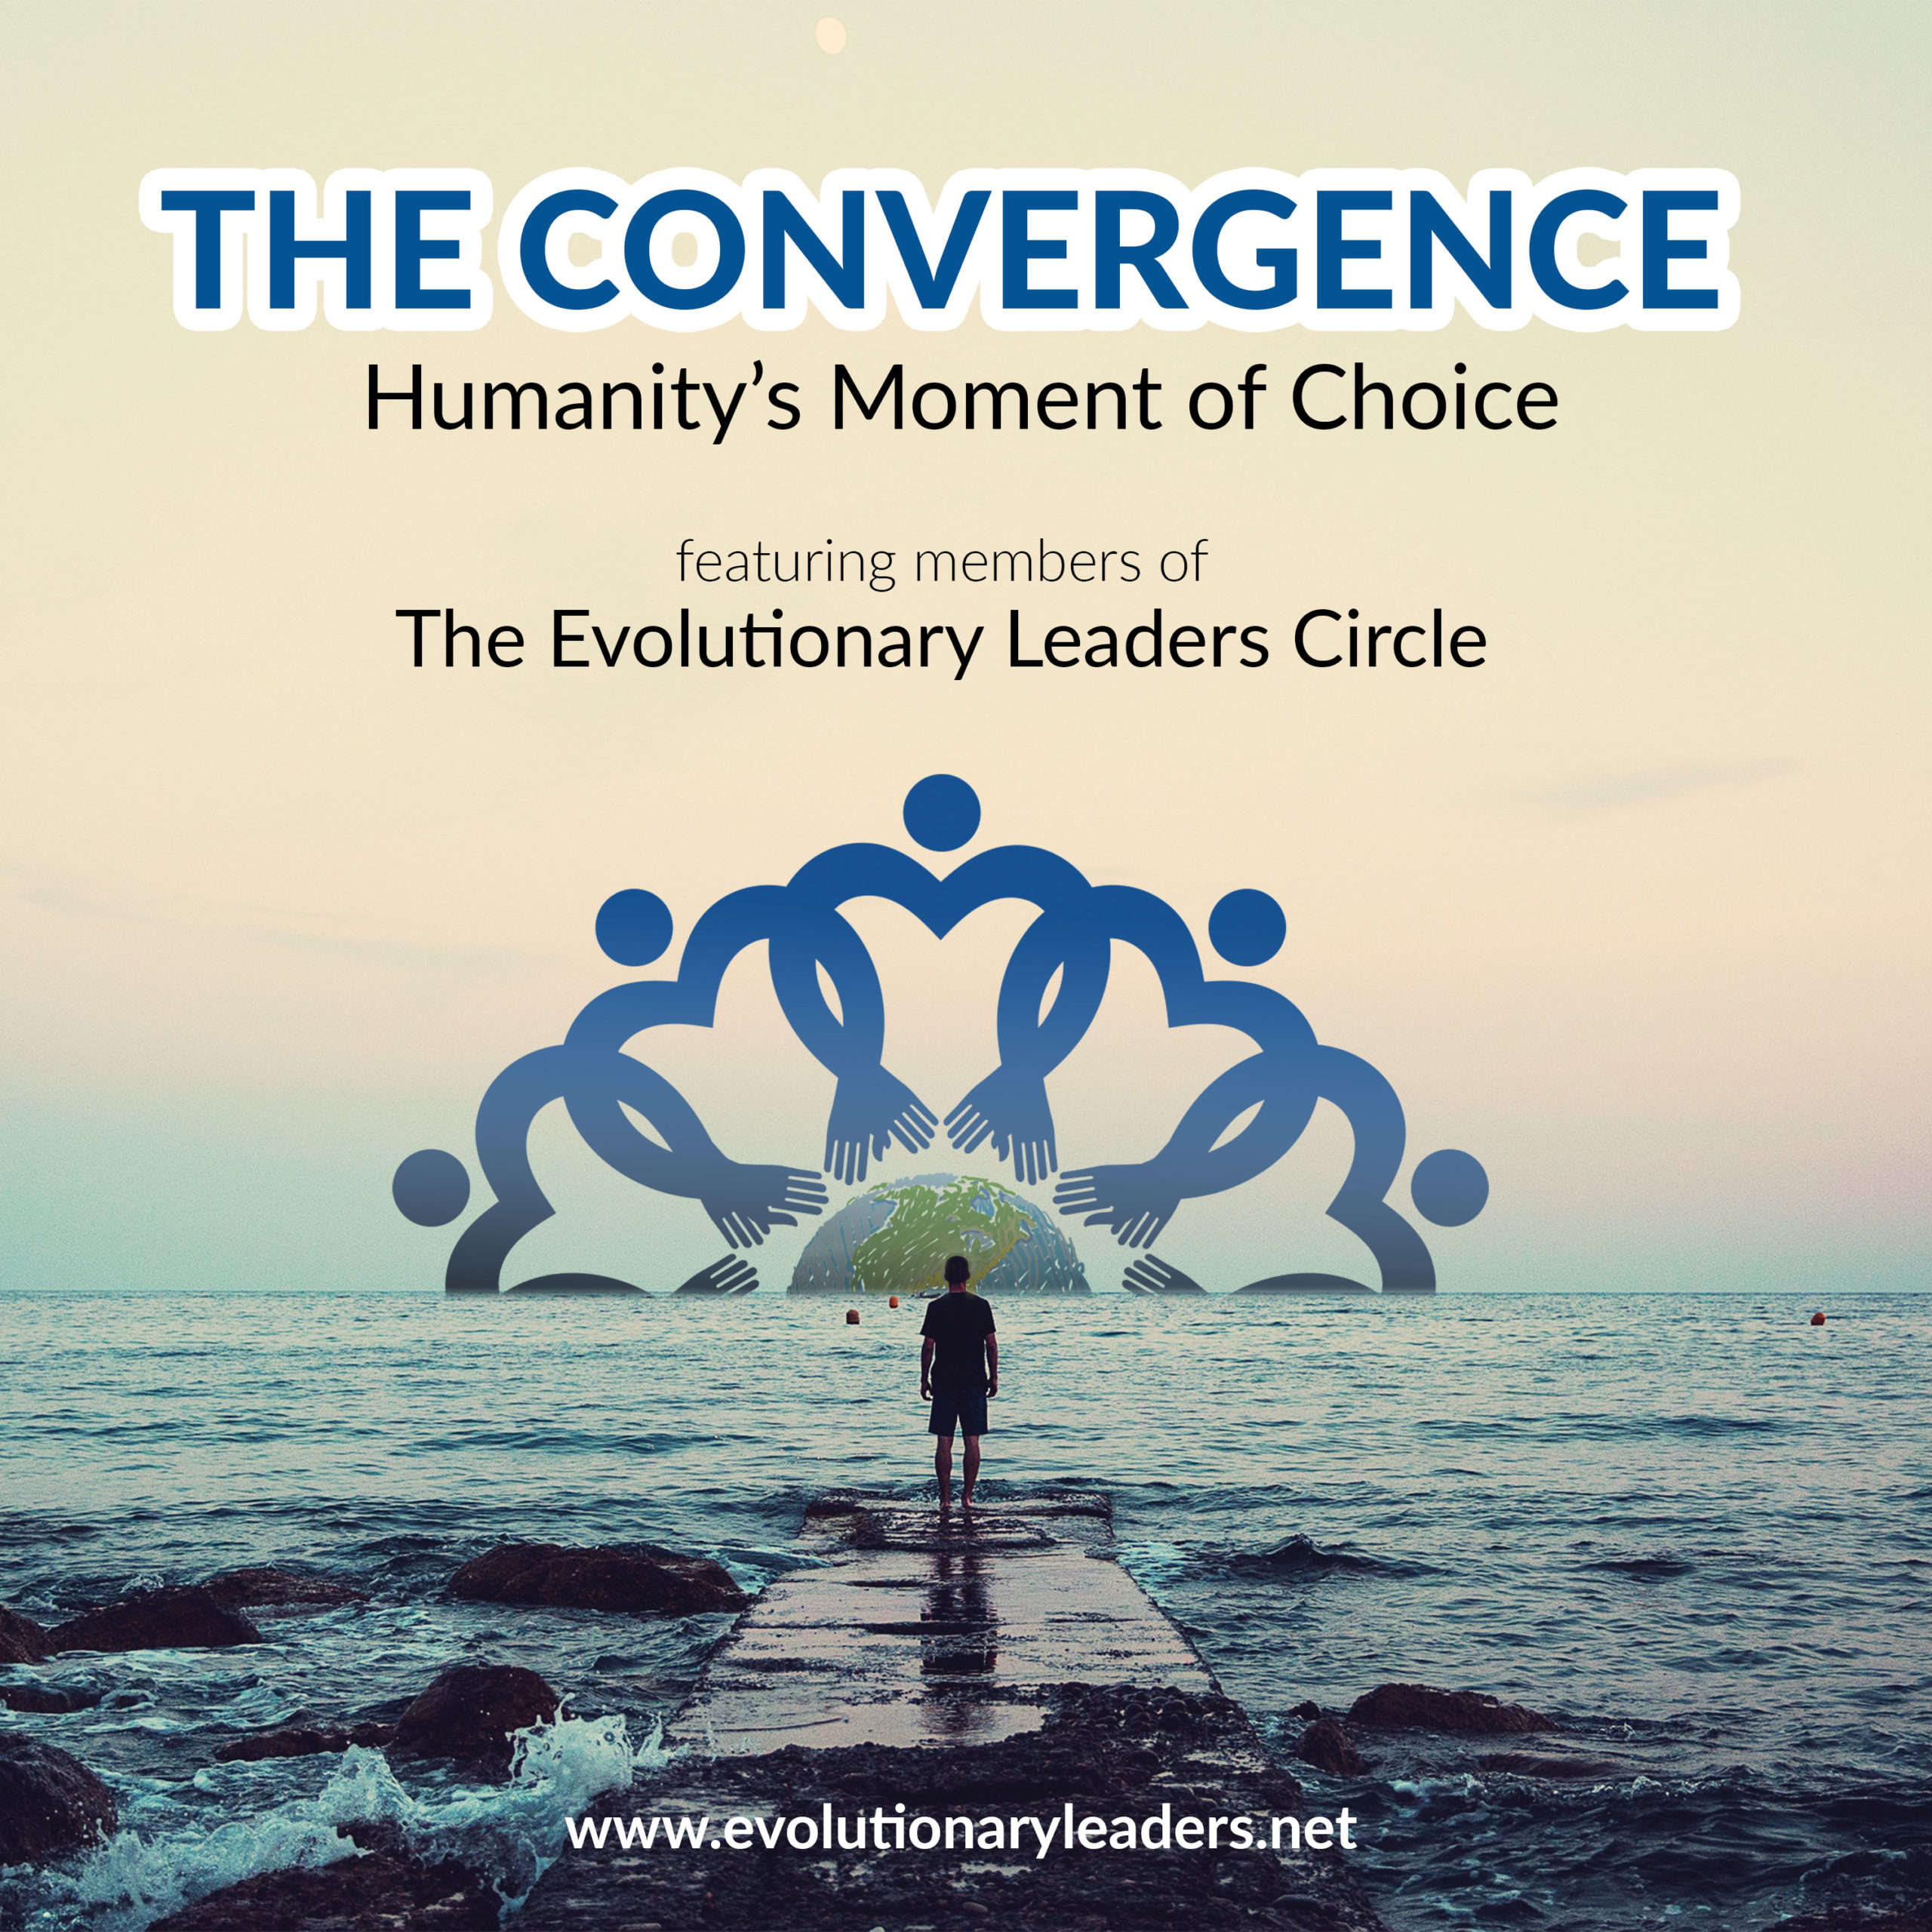 Best-Selling Authors and Earth Experts Join The Convergence on VoiceAmerica to Recap Earth Day Programs from Around the World